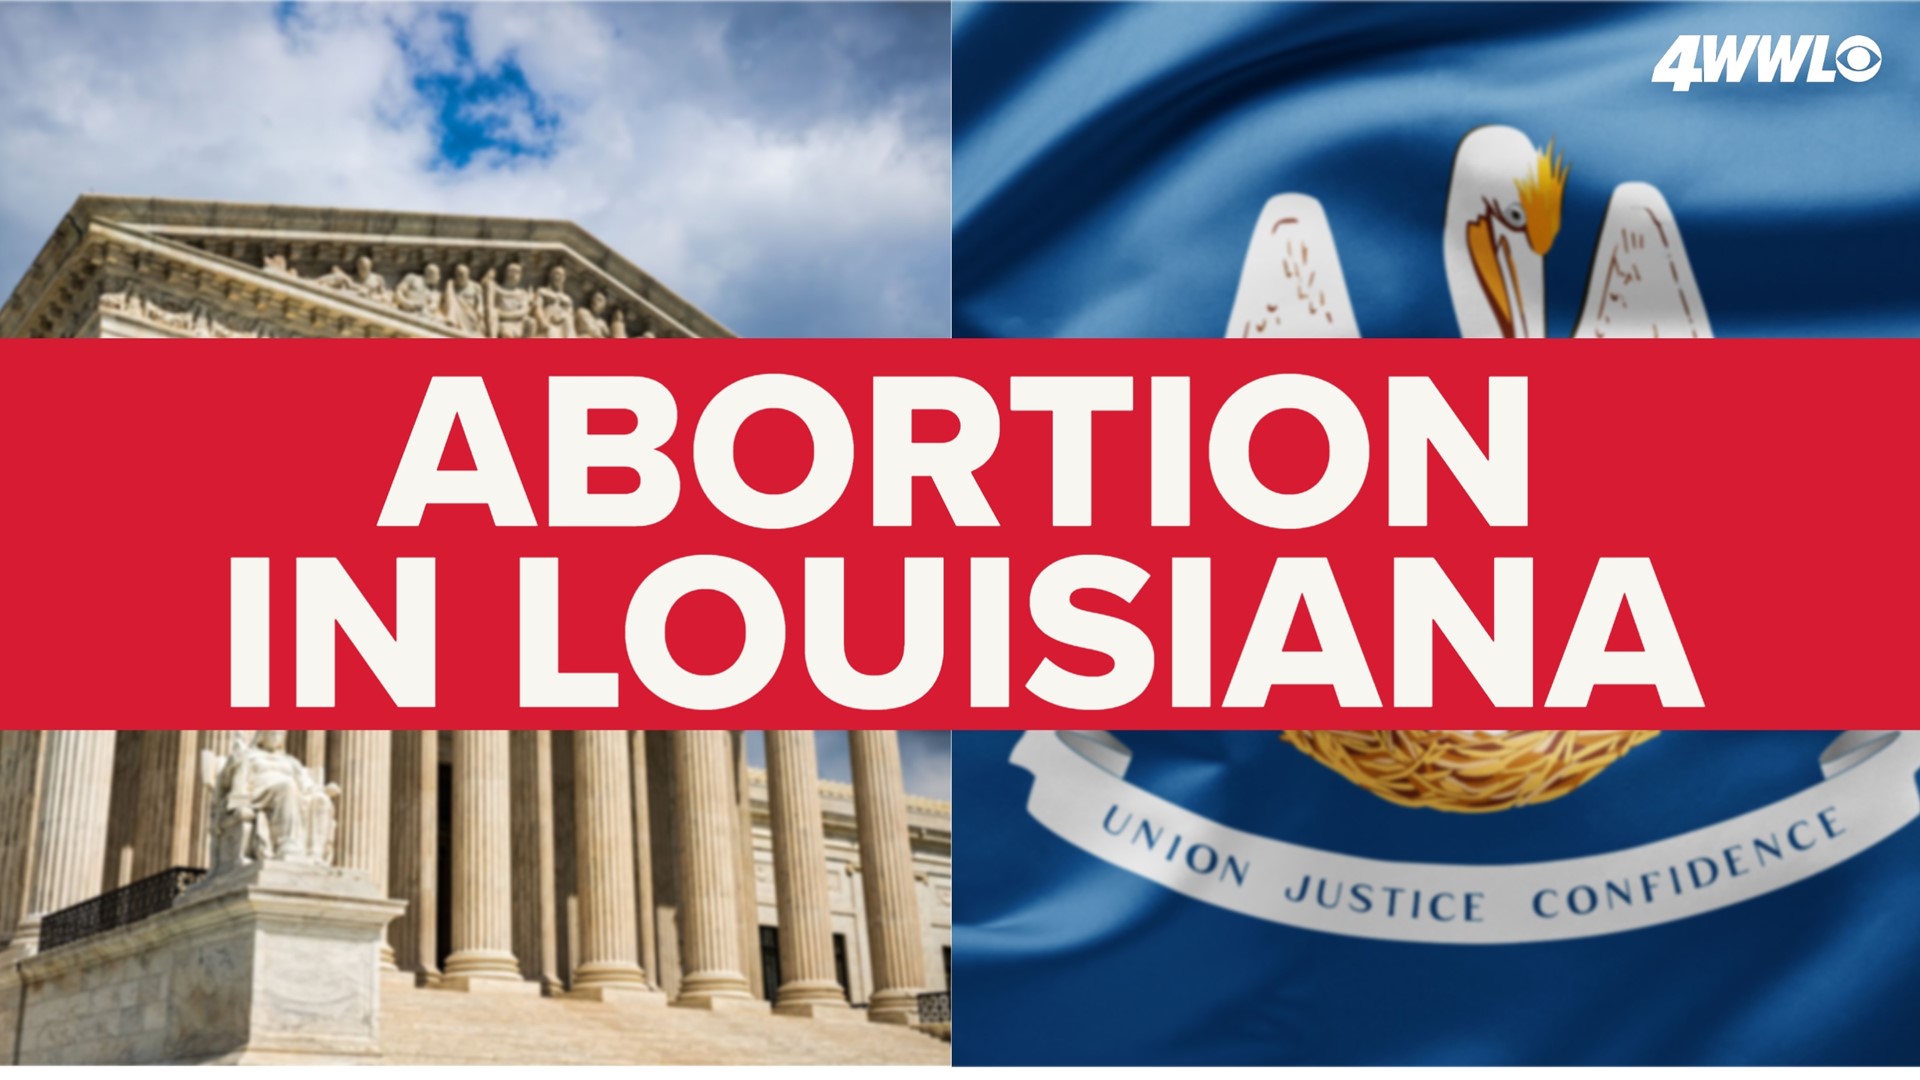 The New Orleans city council took a stance on state abortion laws, asking that the city not use public money to enforce them.